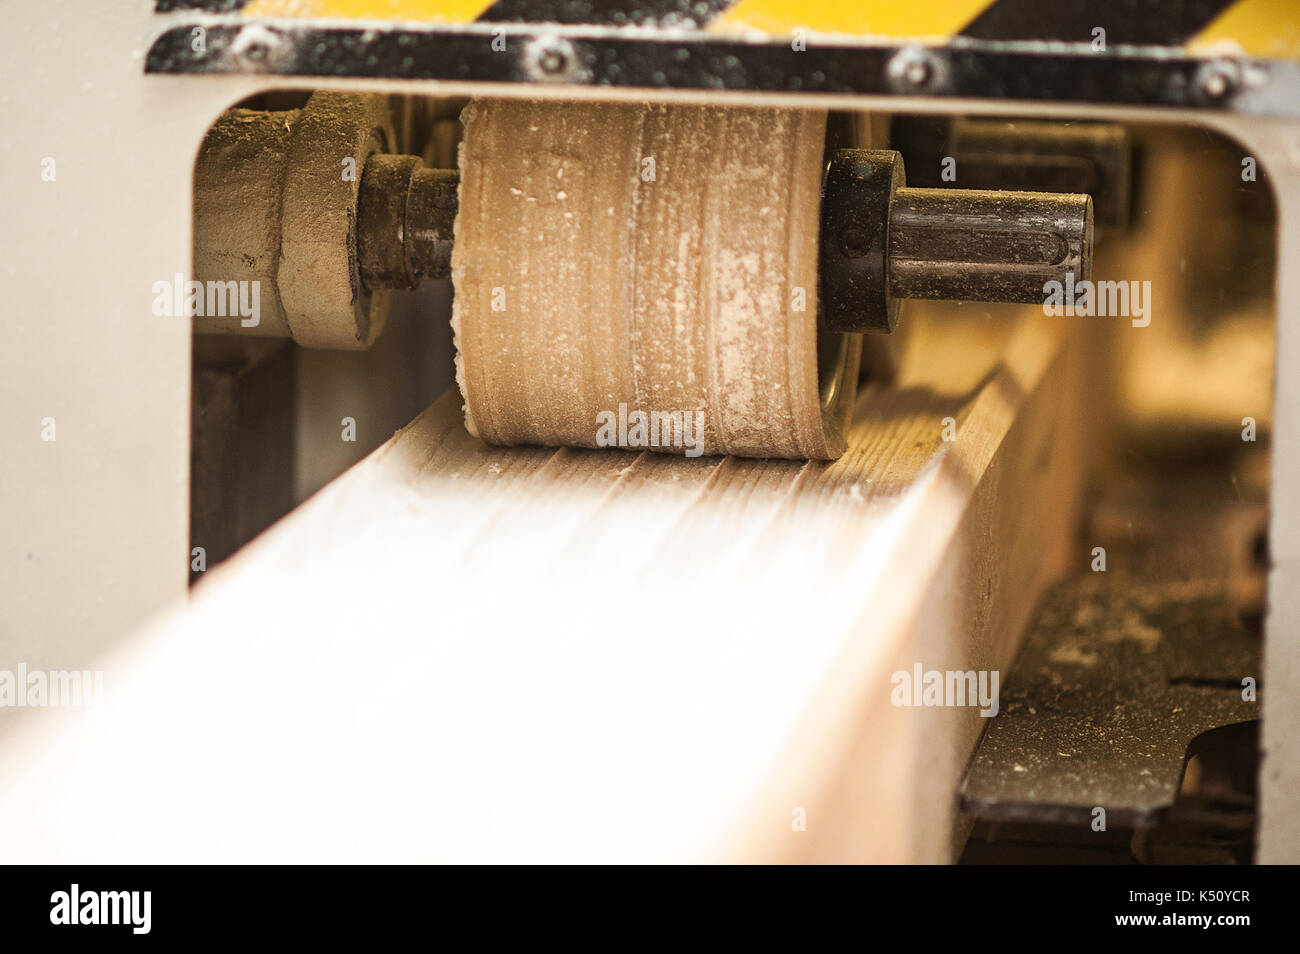 Woodworking machine with plane during processing. Machine tool in factory. Stock Photo